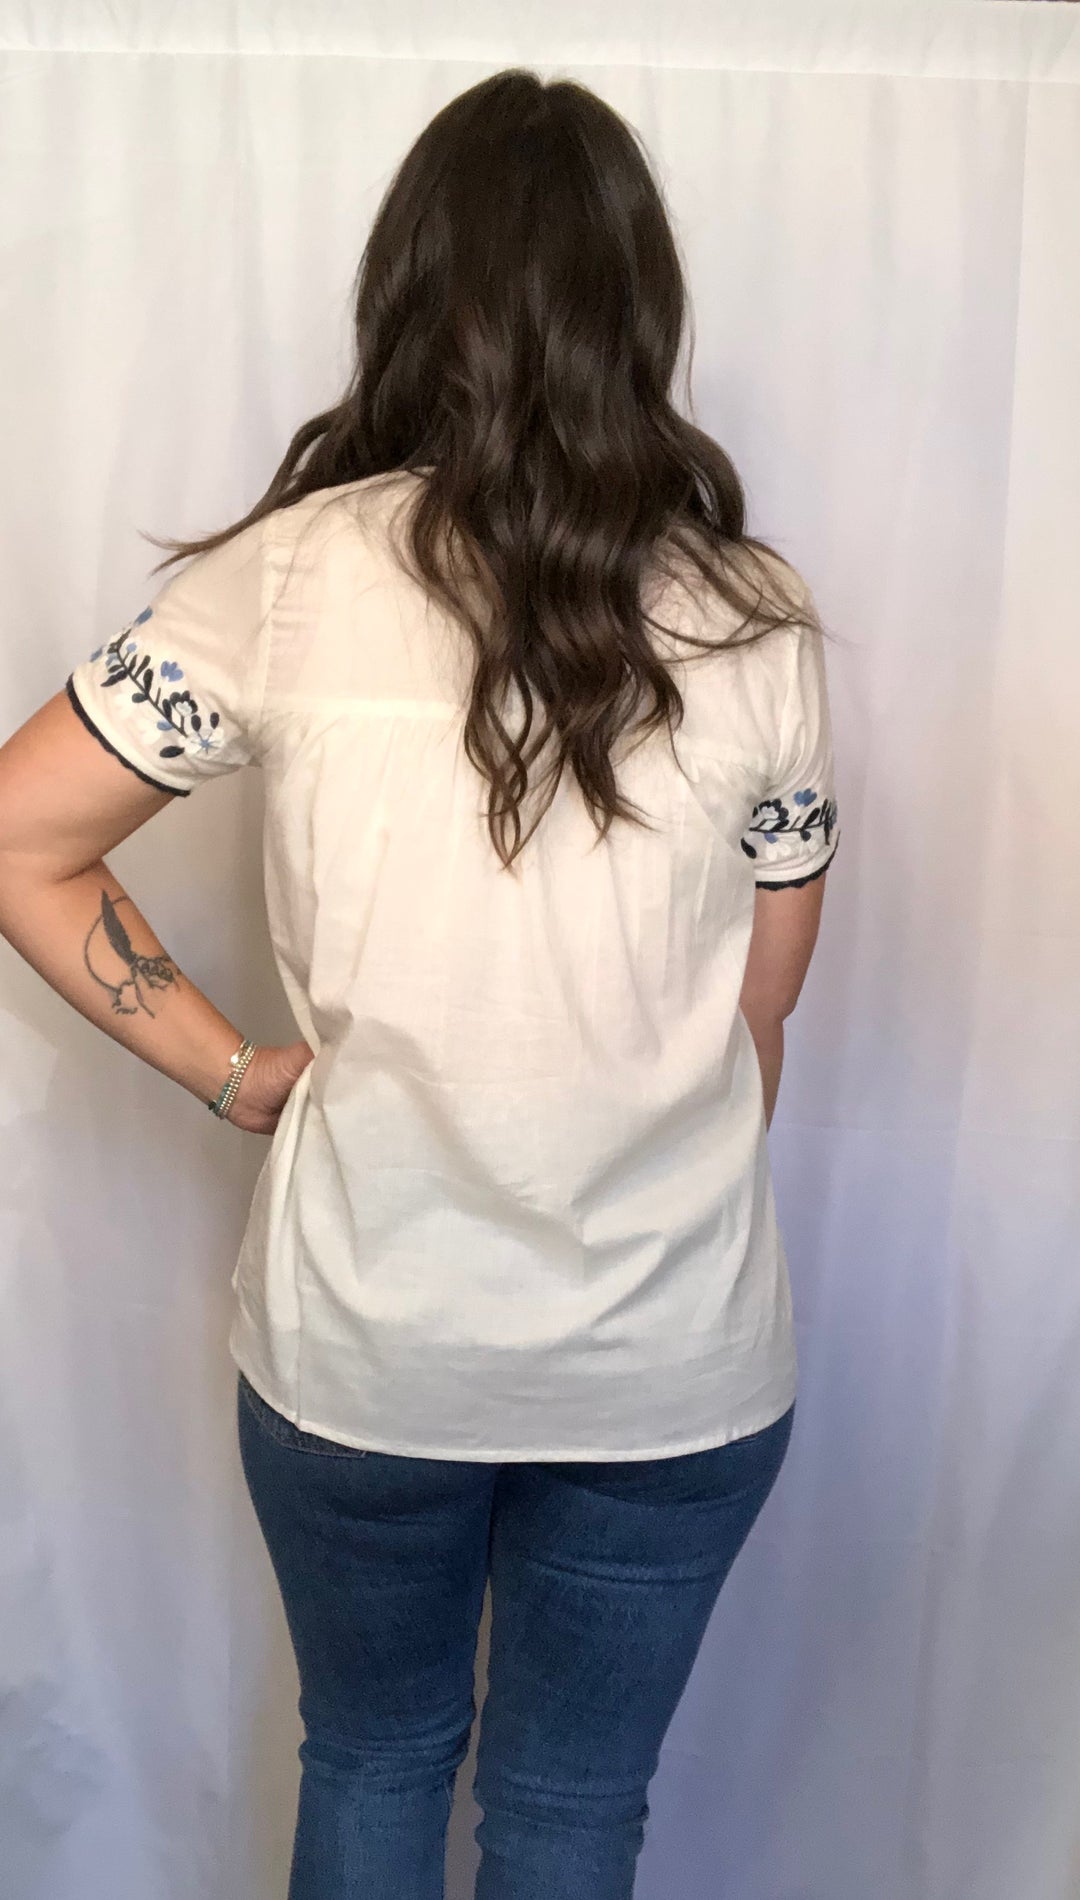 White/Blue Embroidered Short Sleeve Top